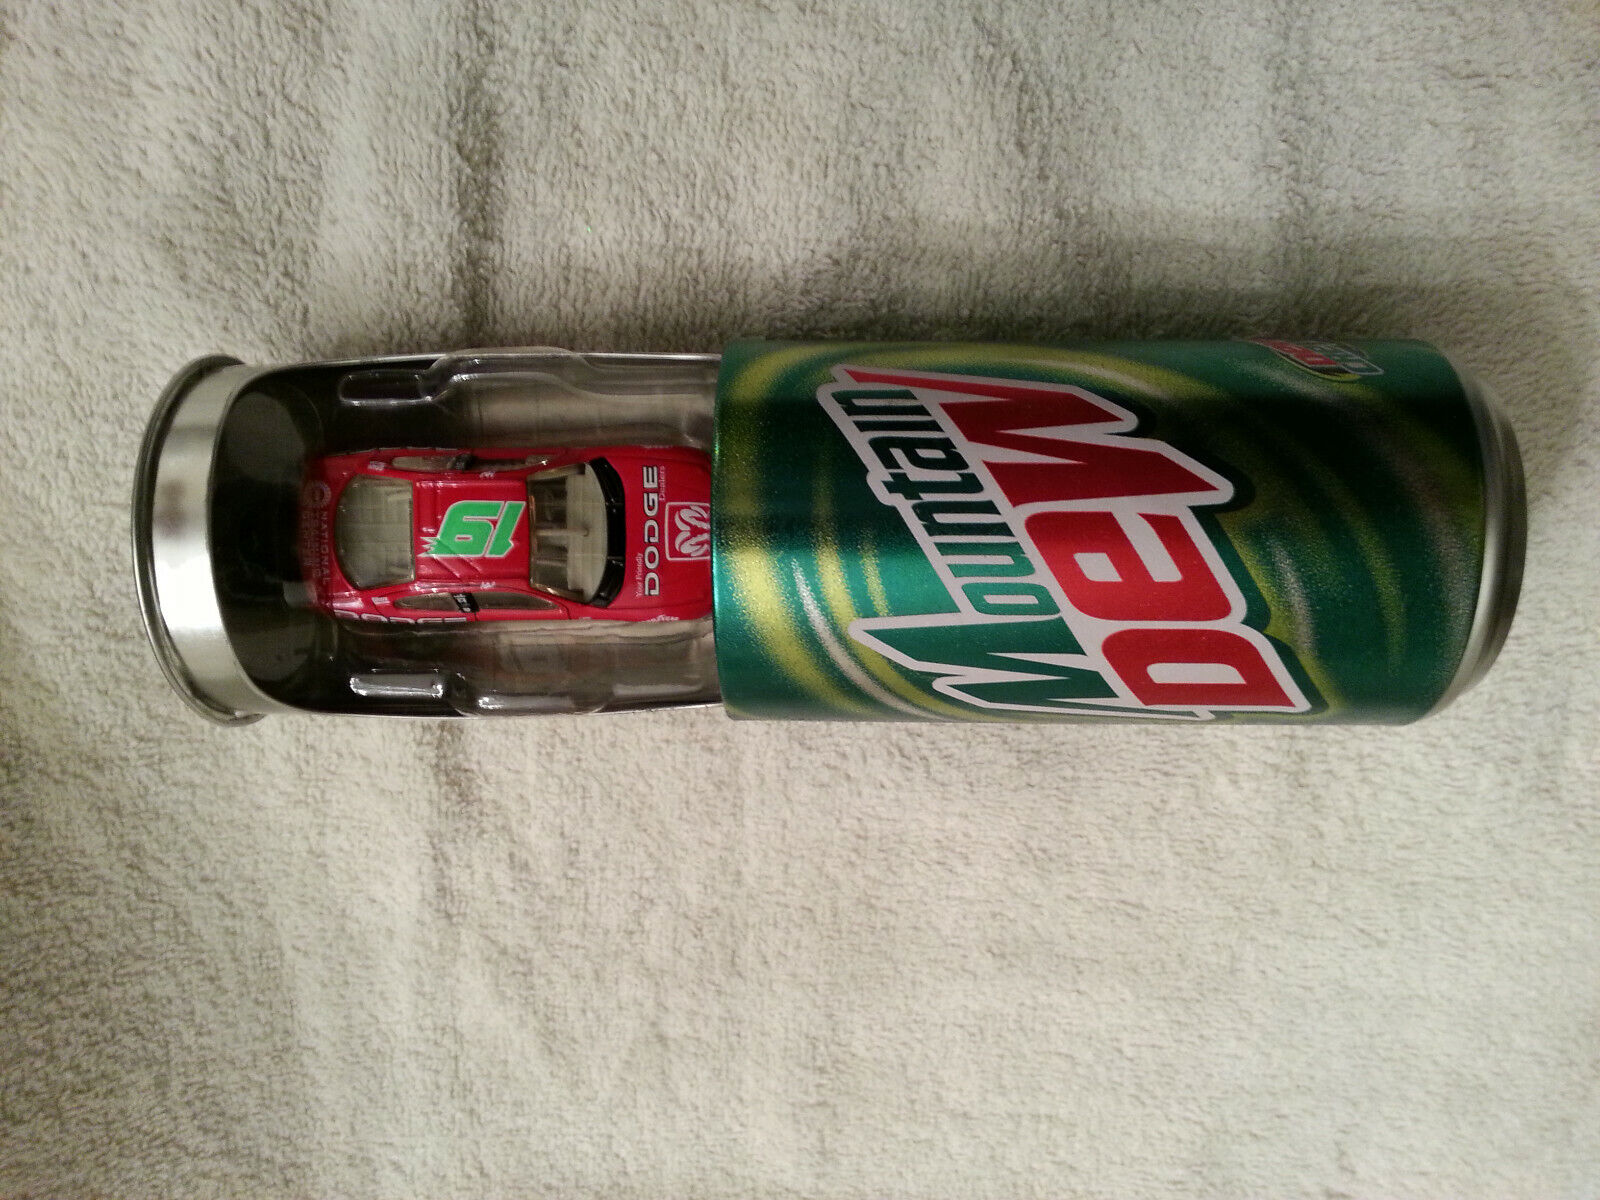 2001 Casey Atwood #19 Dodge Intrepid R/t In Mountain Dew Can 1:64 Die Cast